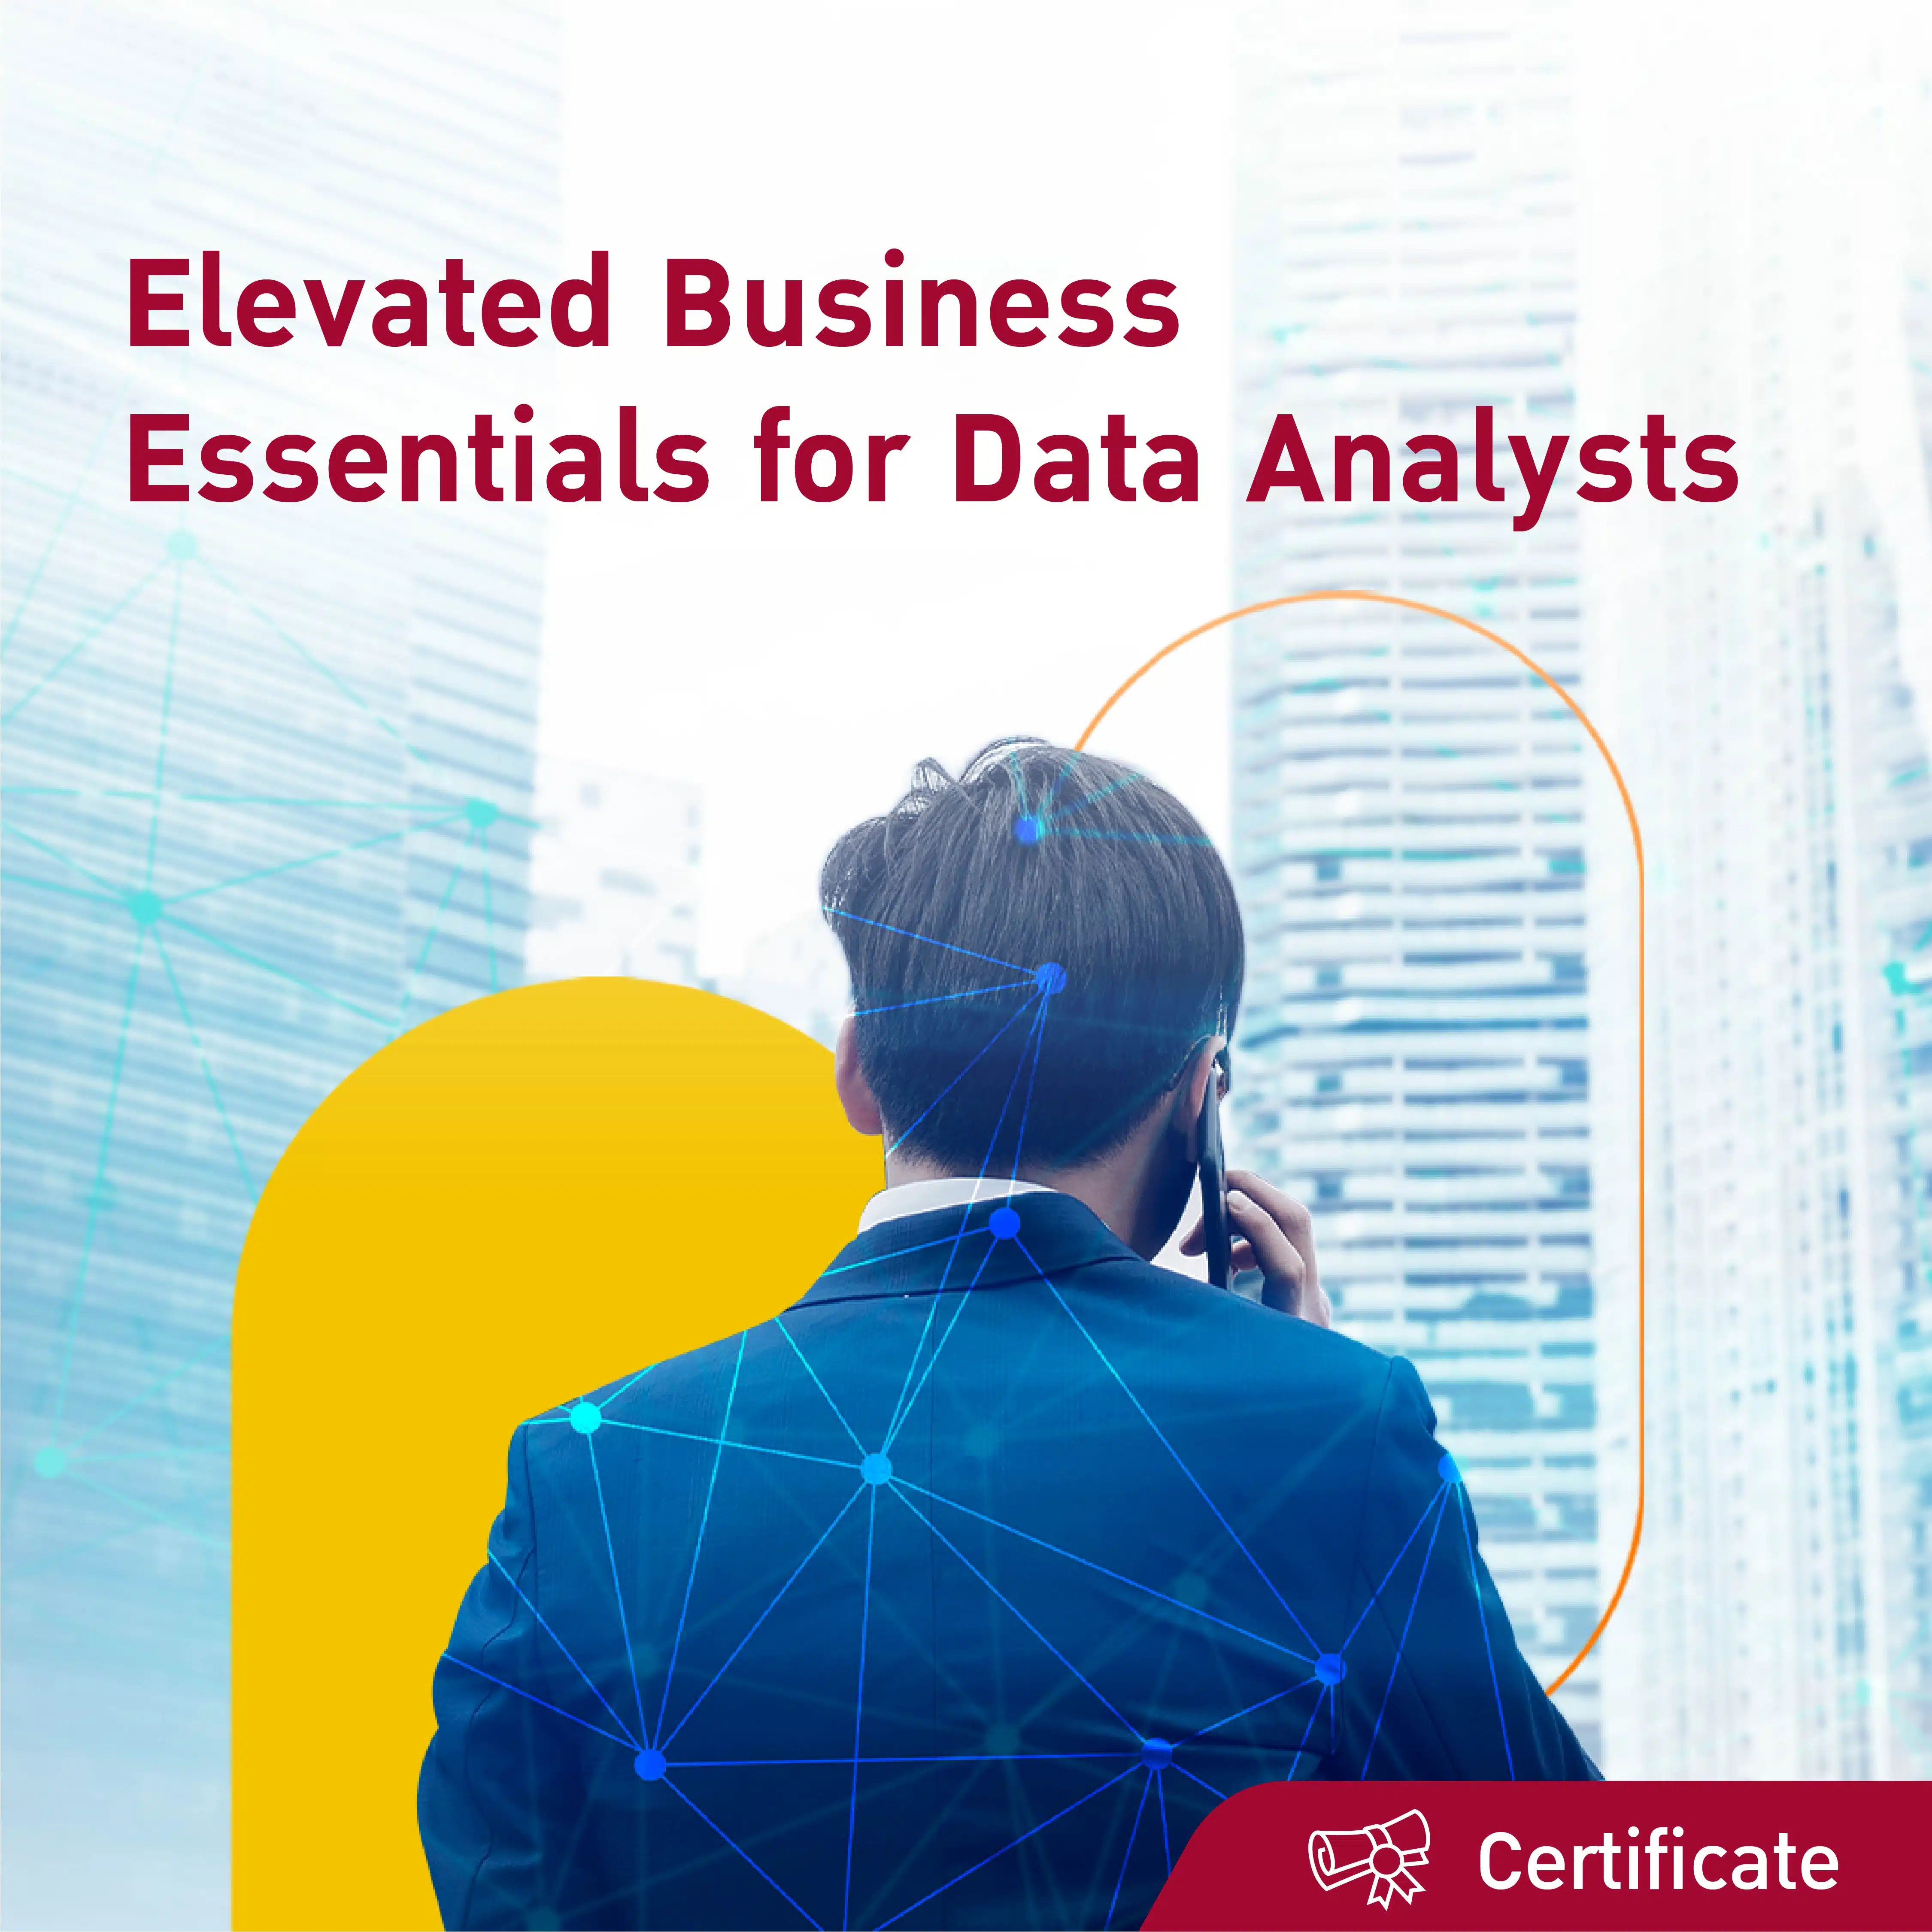 AW_Jobs Base Learning_ Elevated Business Essentials for Data Analysts_1080x1080